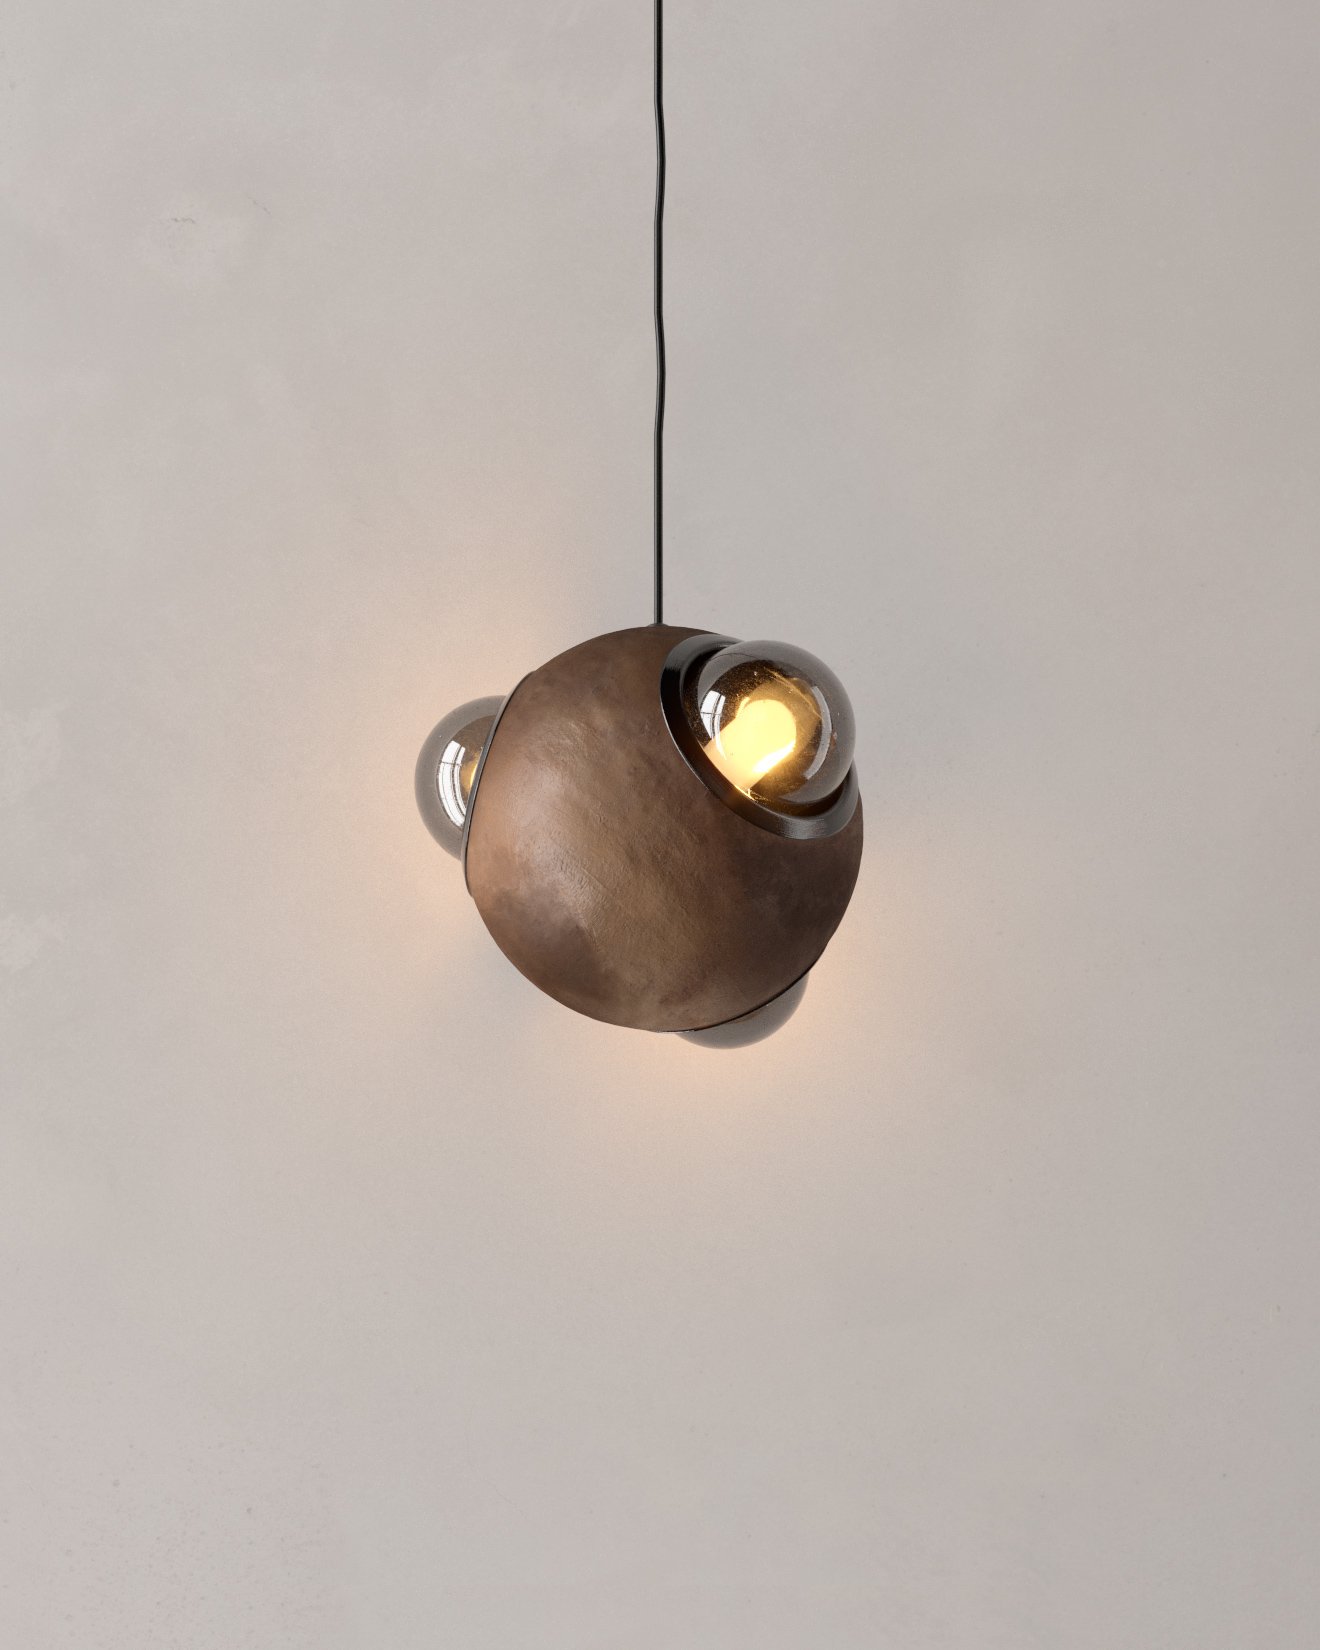 HUMO 18 hanging lamp in mottled mud color with smoked glass diffusers and black anodized aluminum detail designed by Bandido Studio